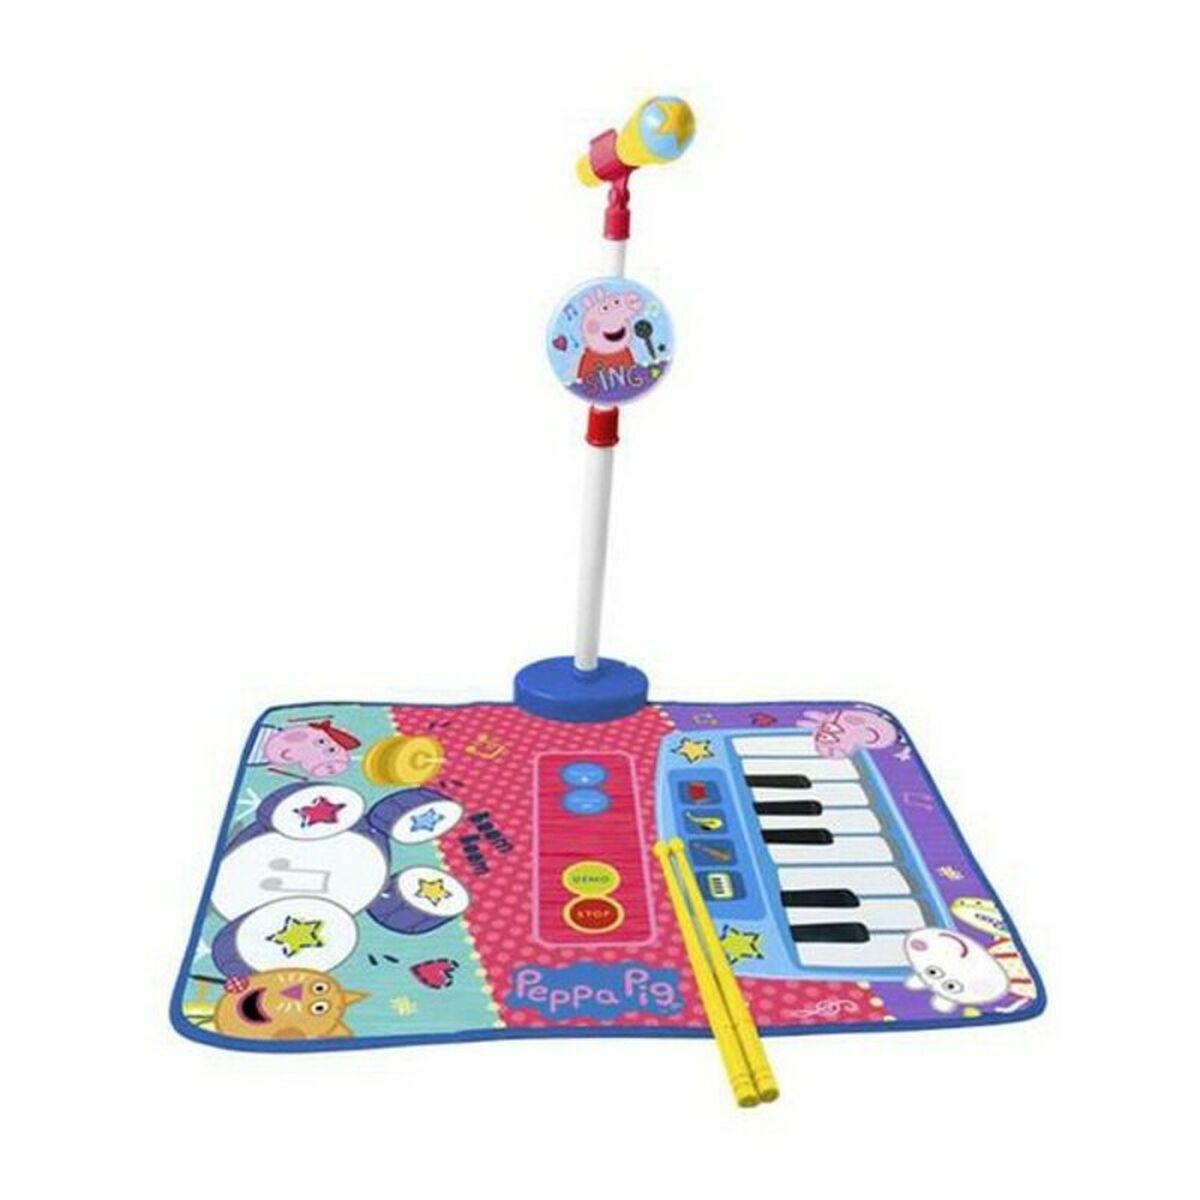 Giocattolo Musicale 3 en 1 Peppa Pig